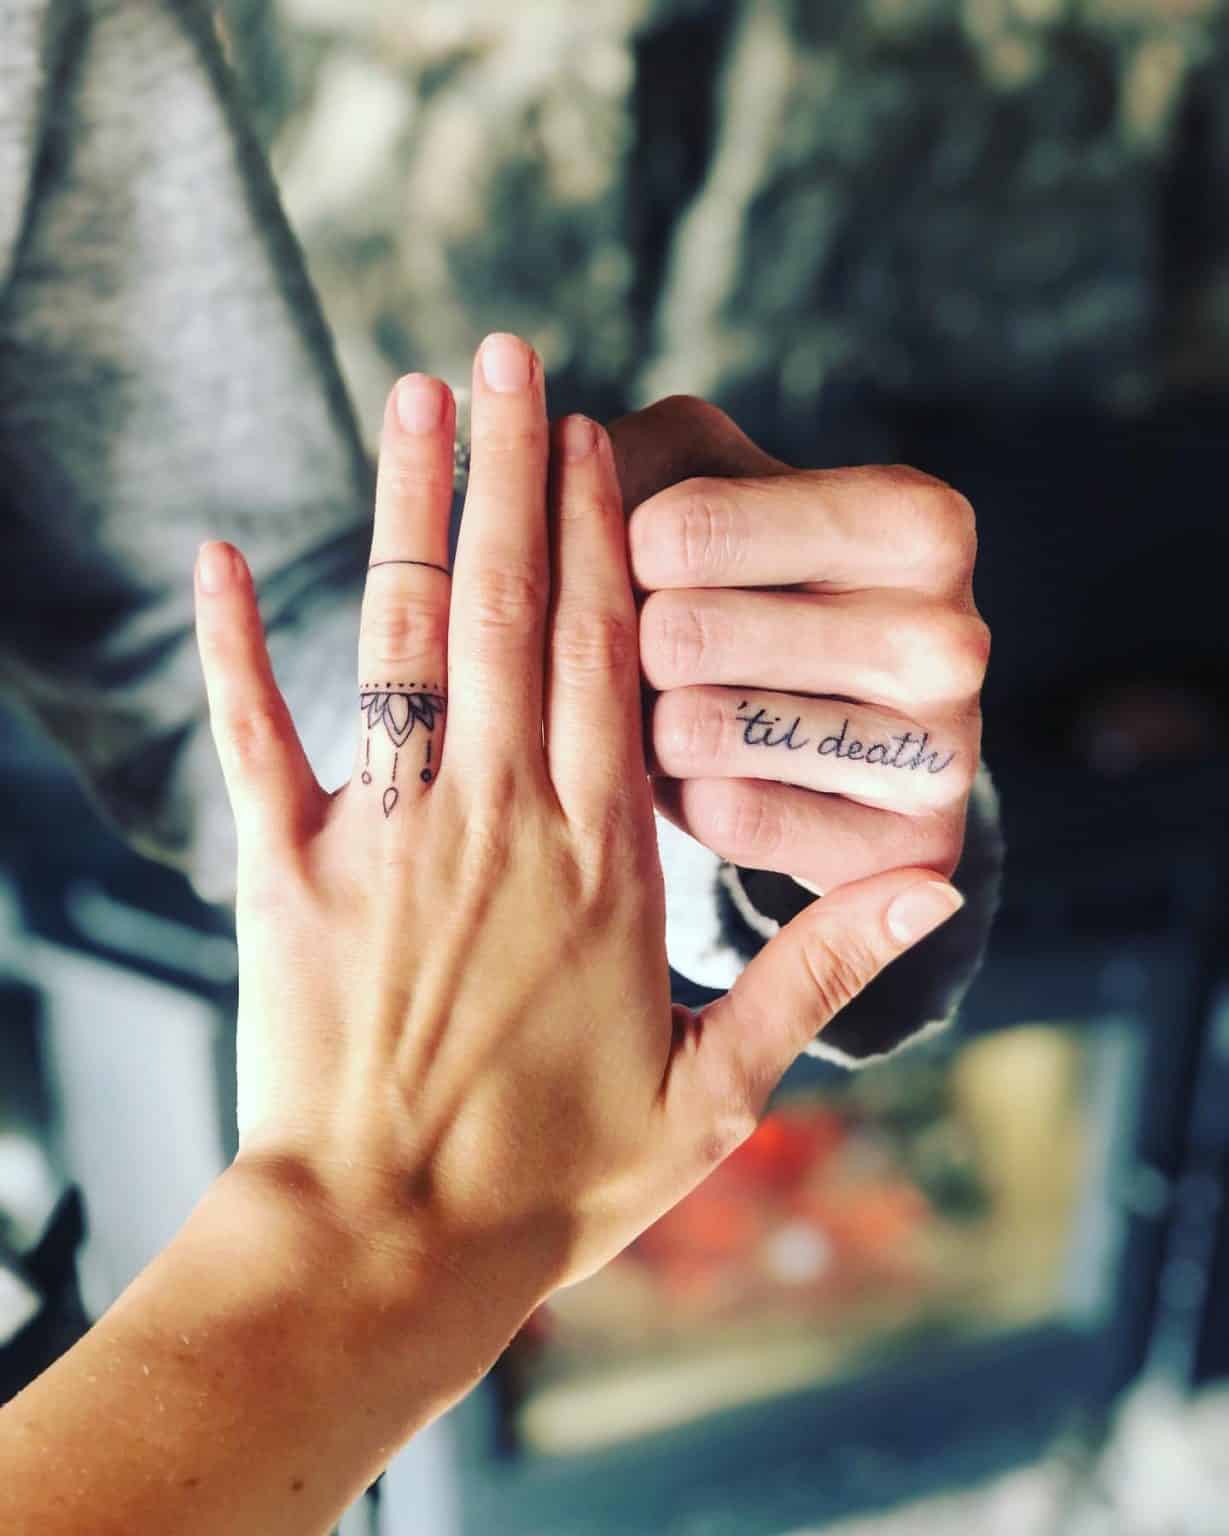 Meaningful Words wedding finger tattoos